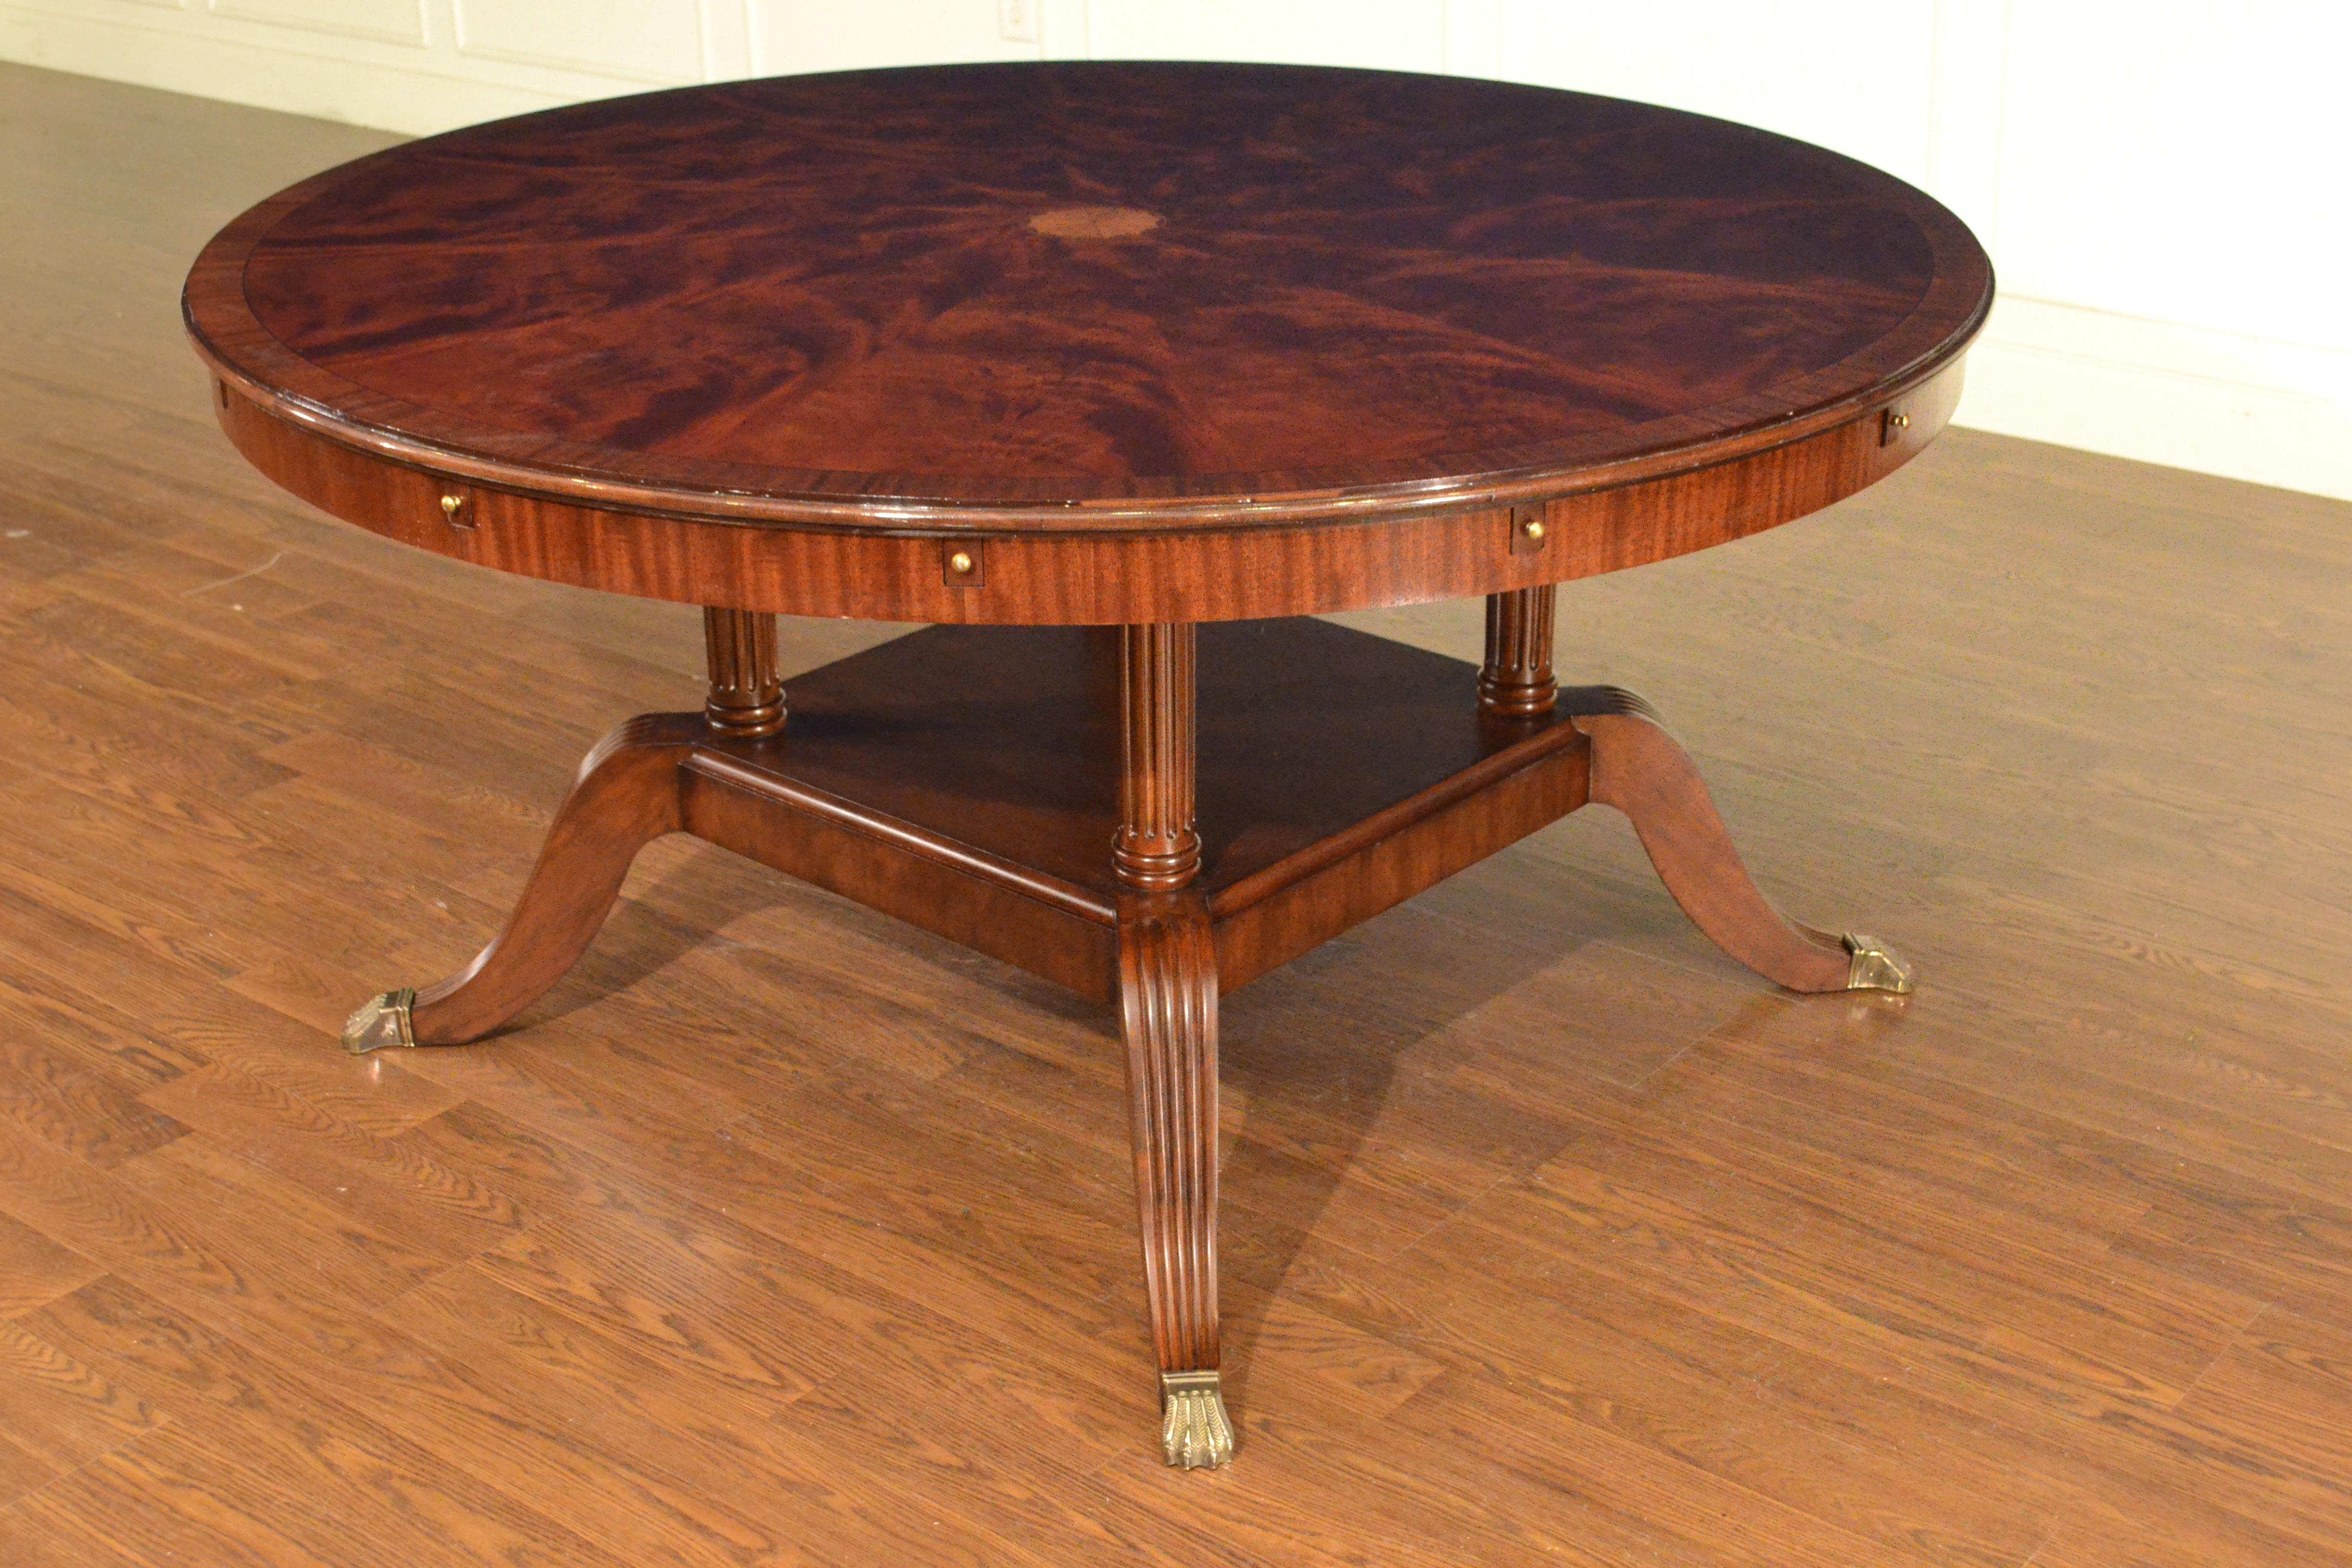 Large Round Perimeter Leaf Mahogany Georgian Style Dining Table by Leighton Hall For Sale 2